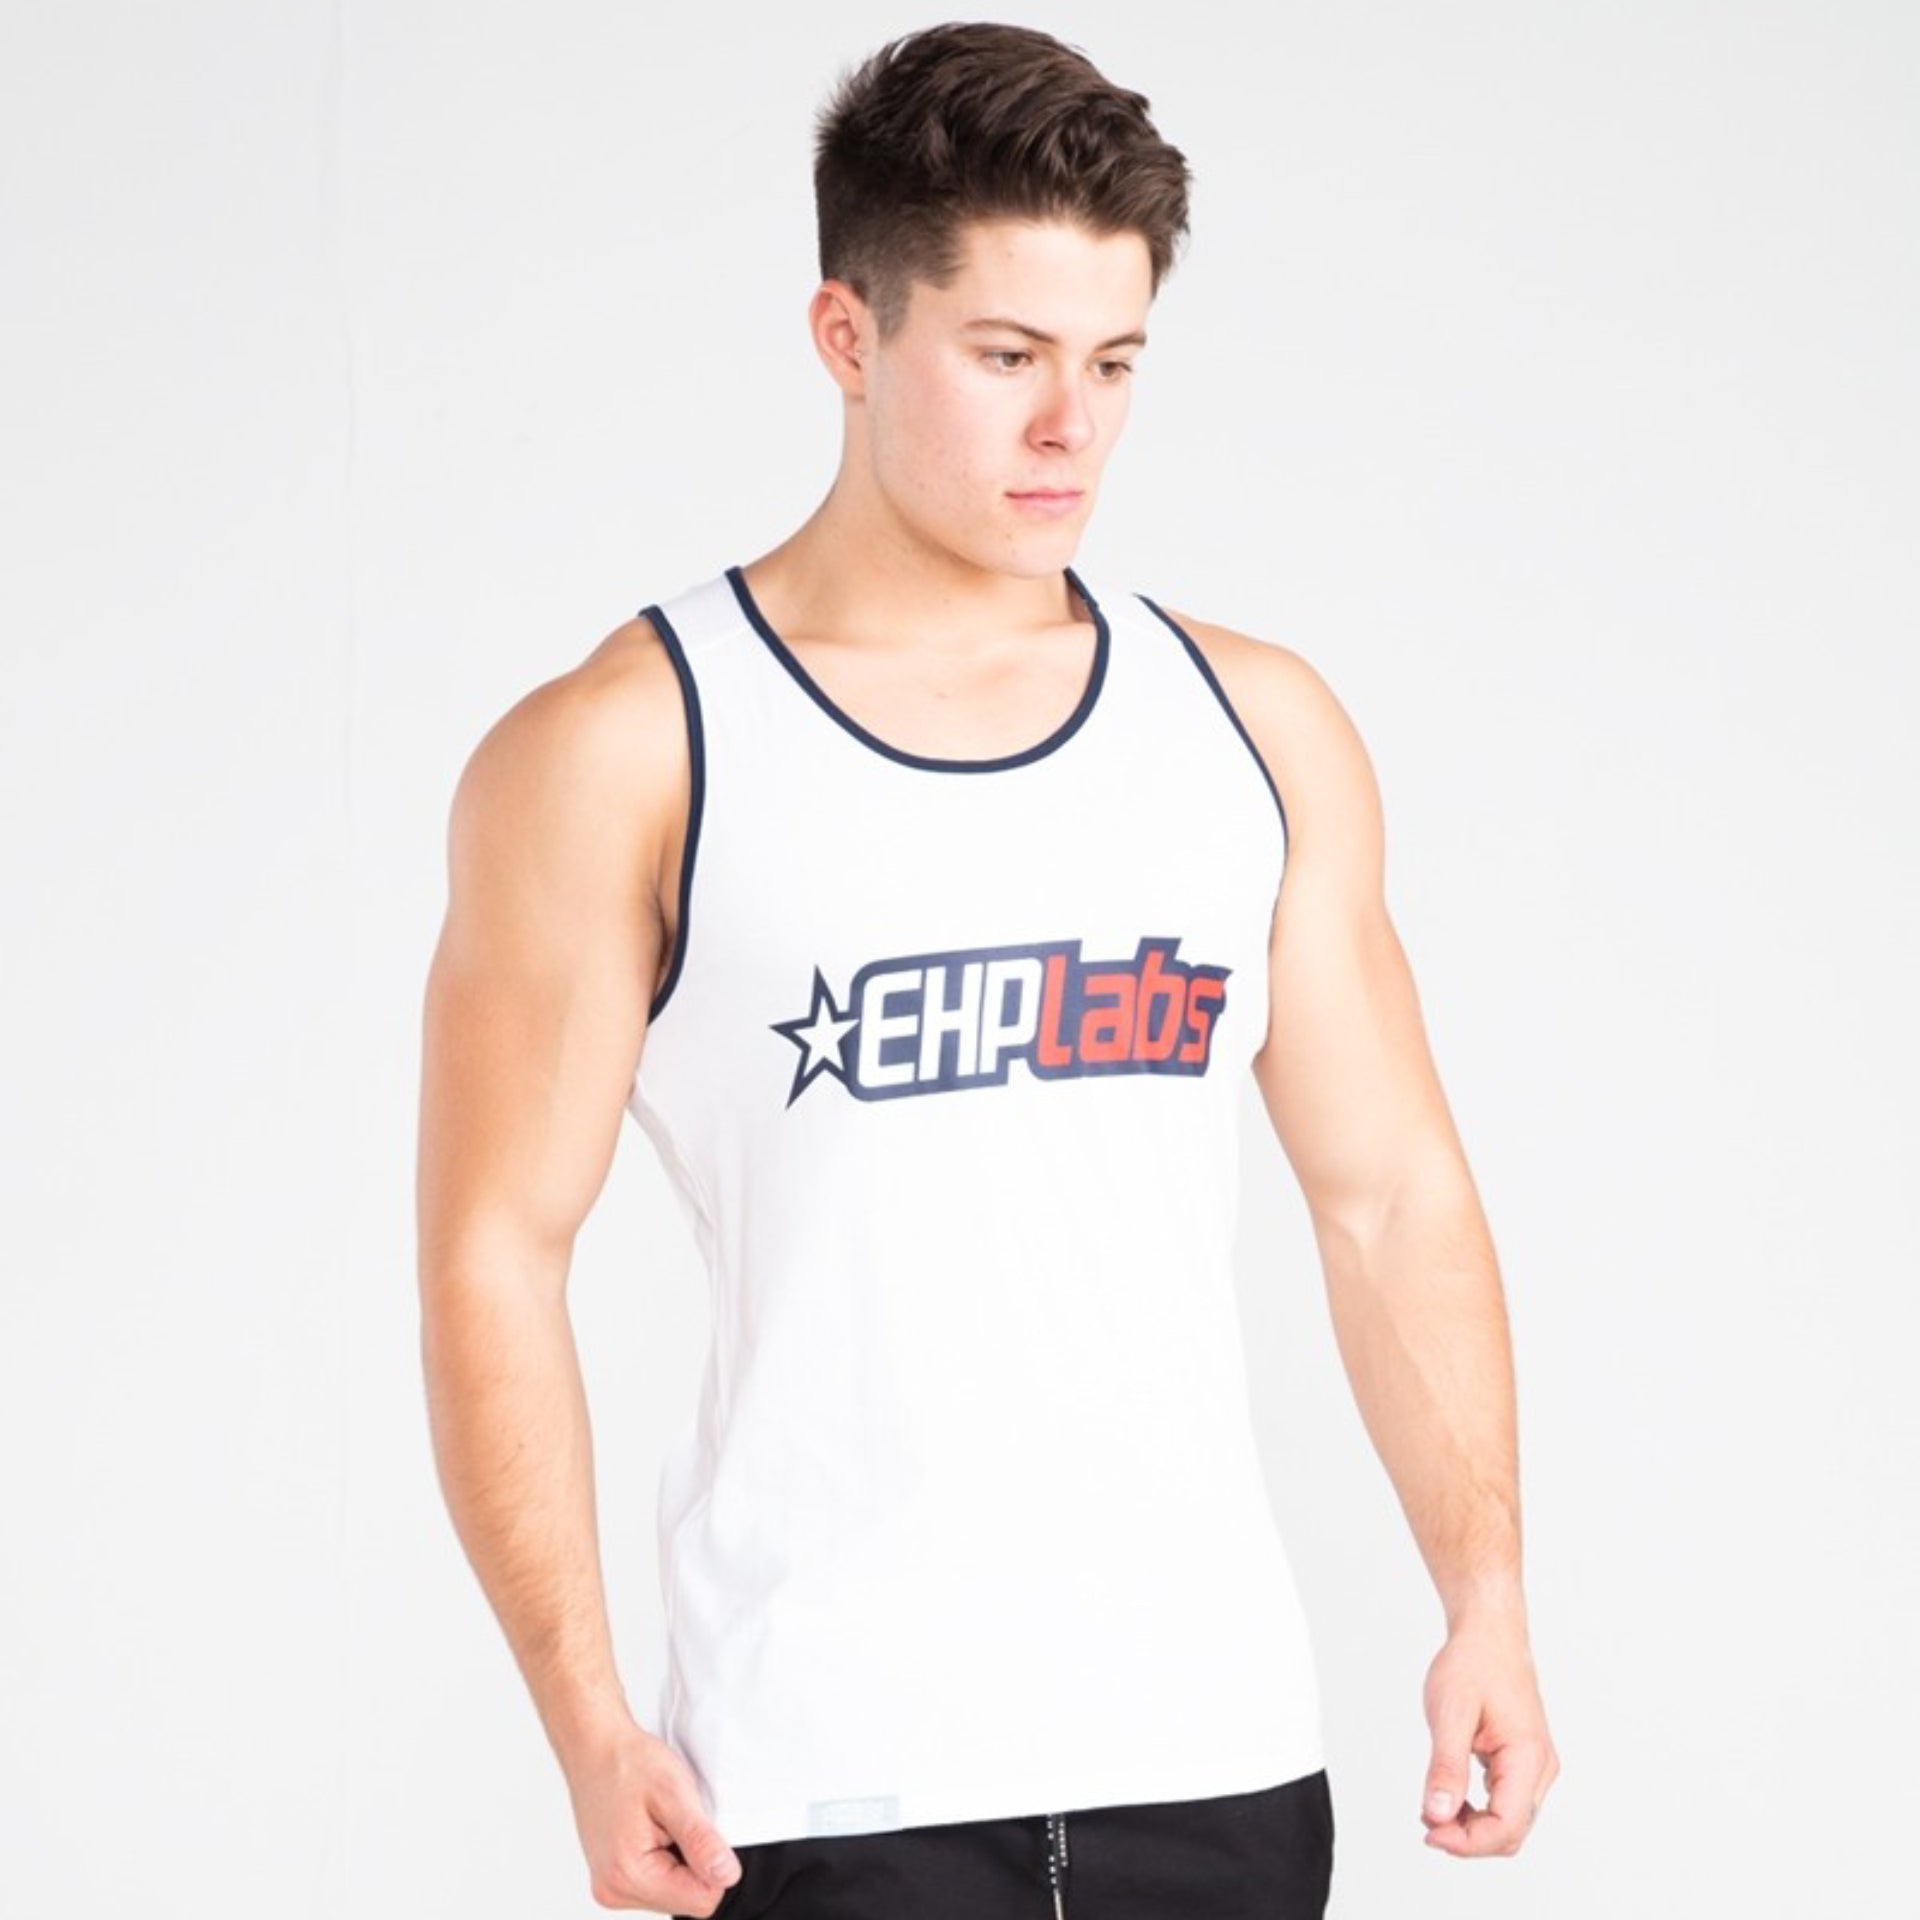 Classic Physique Tank